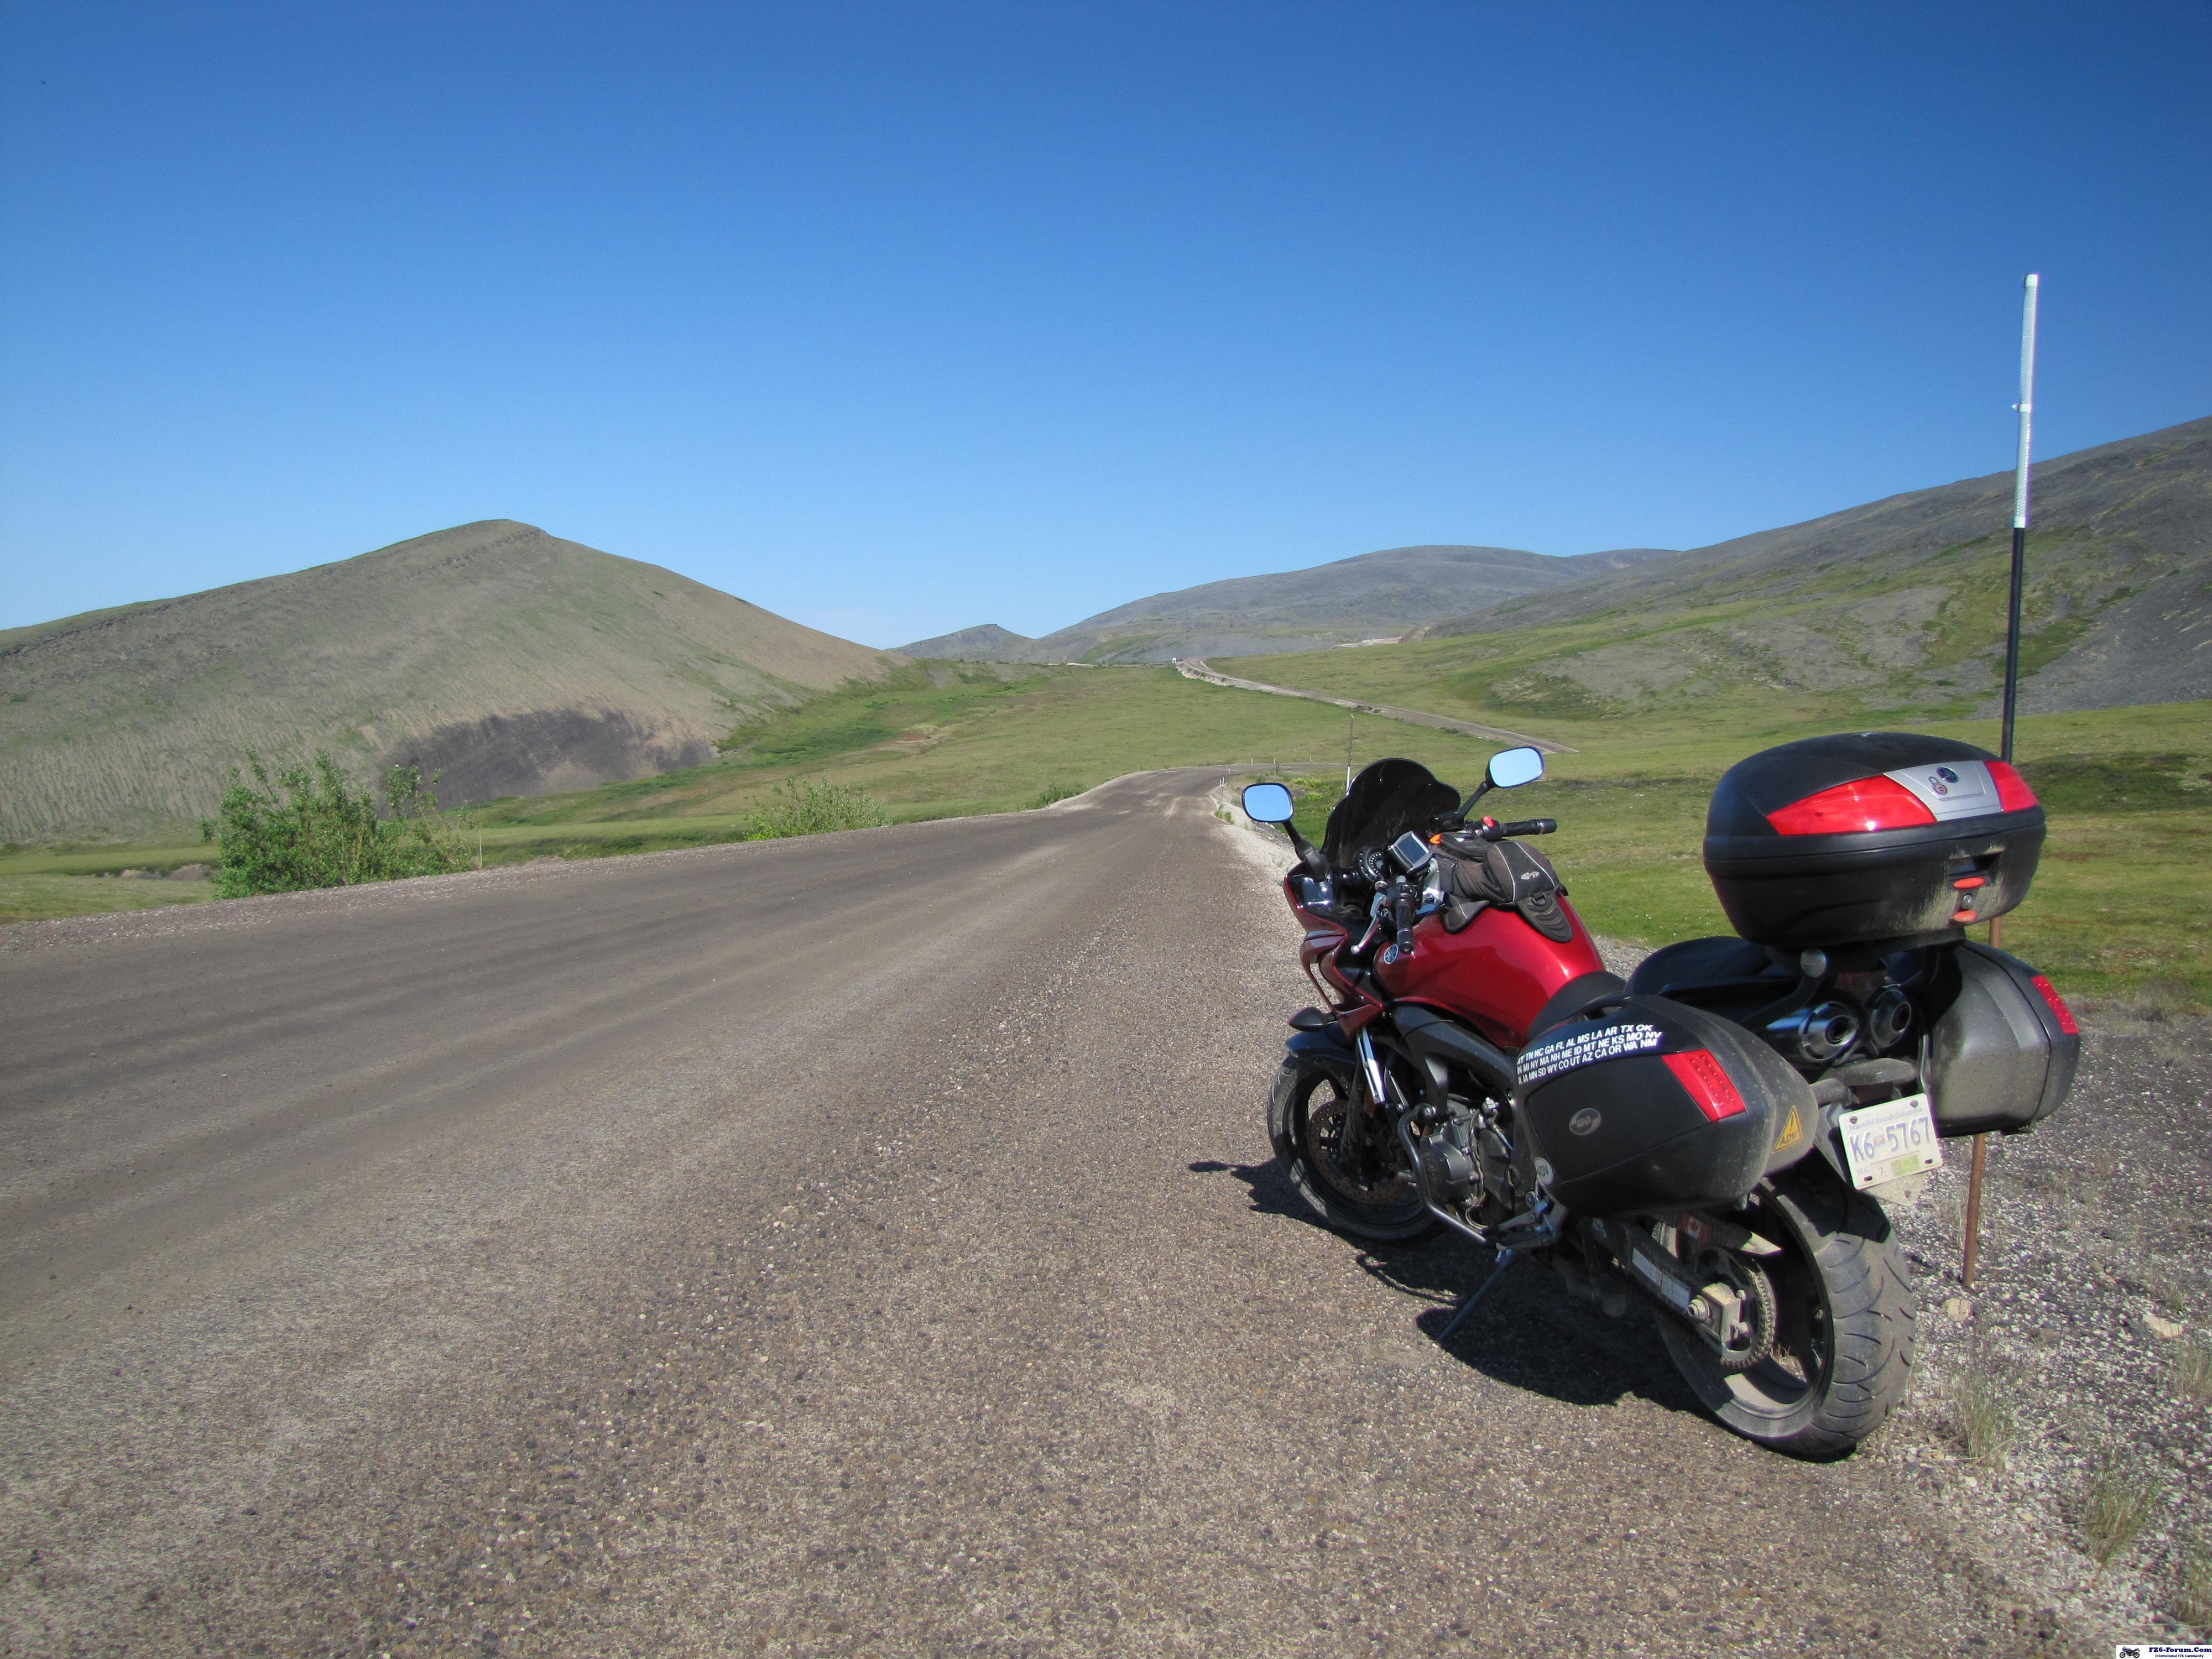 Dempster Highway - In the Arctic Circle